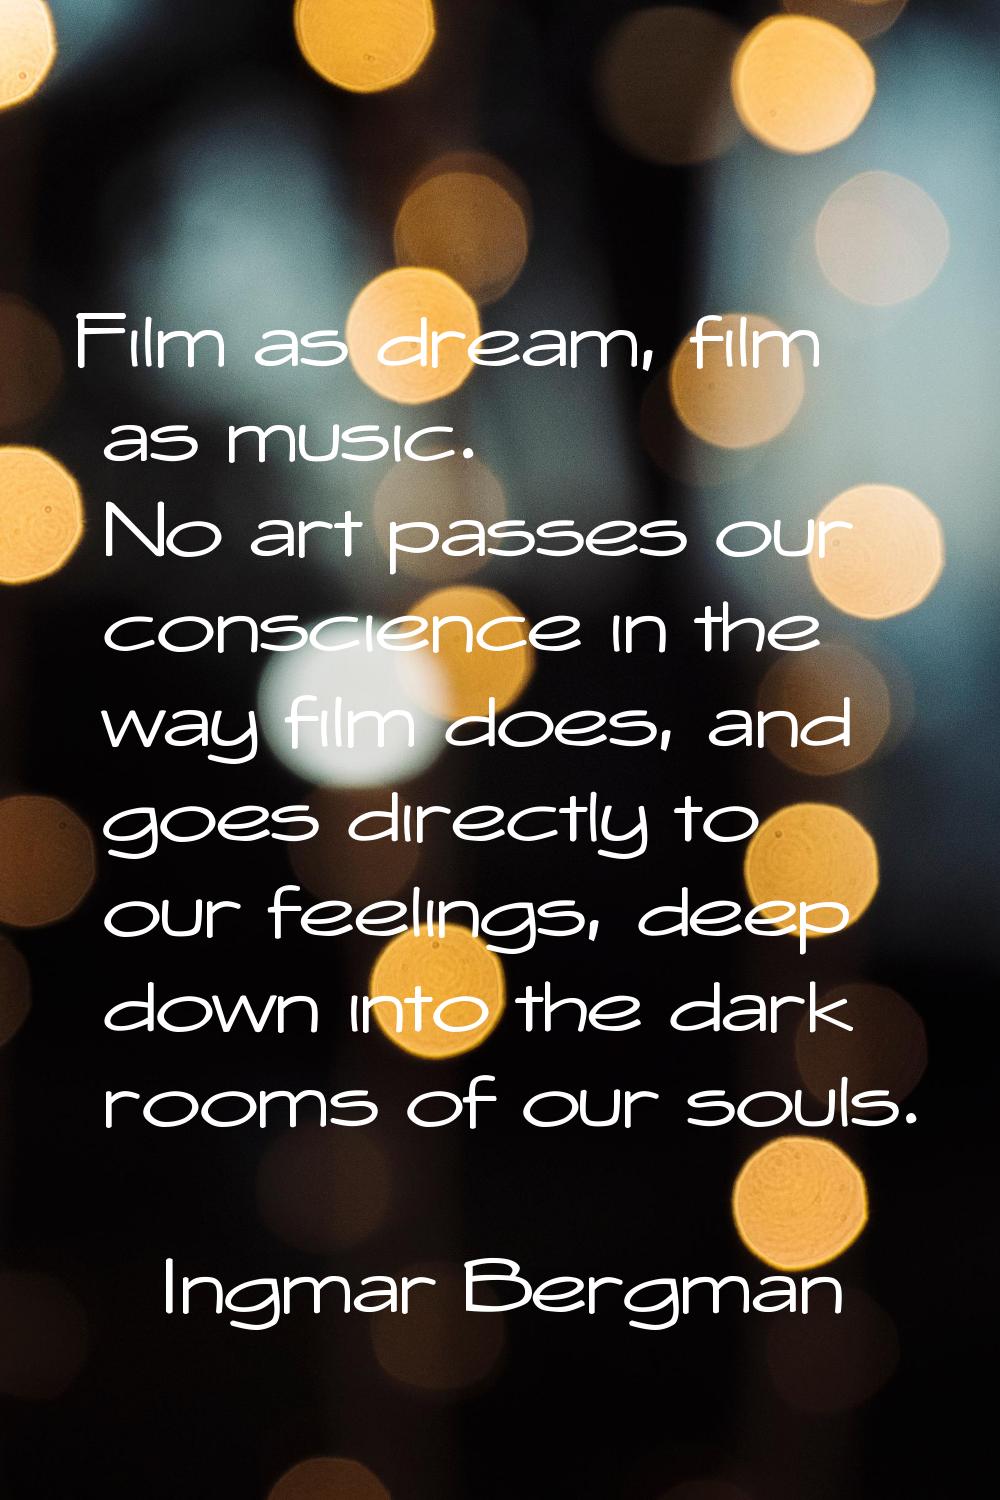 Film as dream, film as music. No art passes our conscience in the way film does, and goes directly 